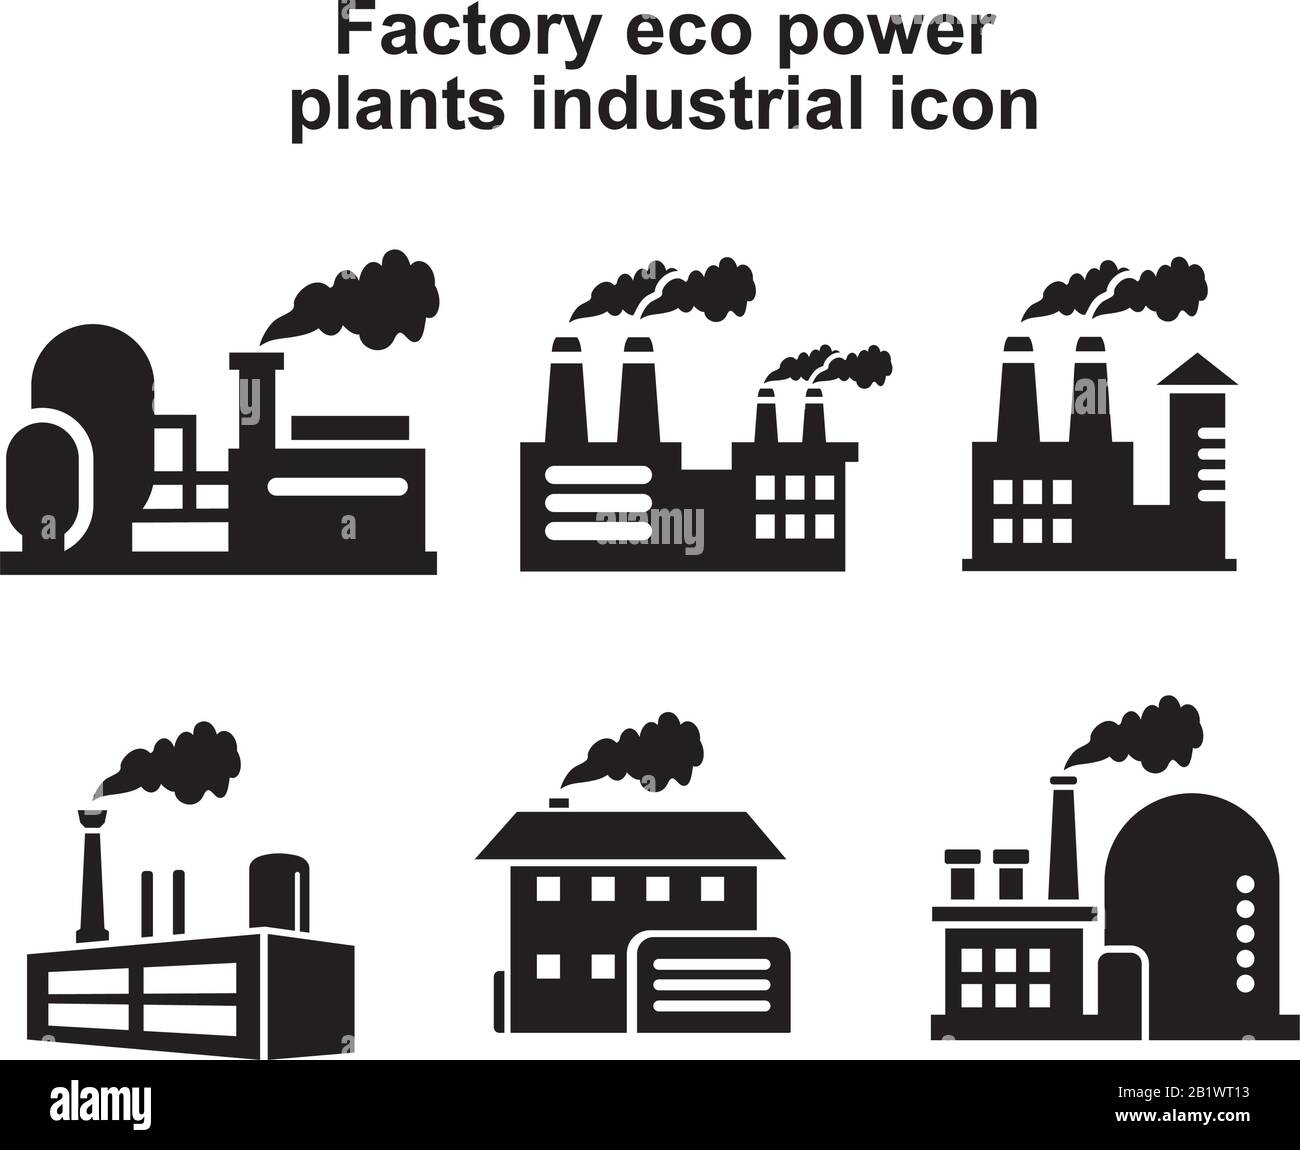 Factory eco power plants industrial icon template black color editable. Factory eco power plants industrial icon symbol Flat vector illustration for g Stock Vector